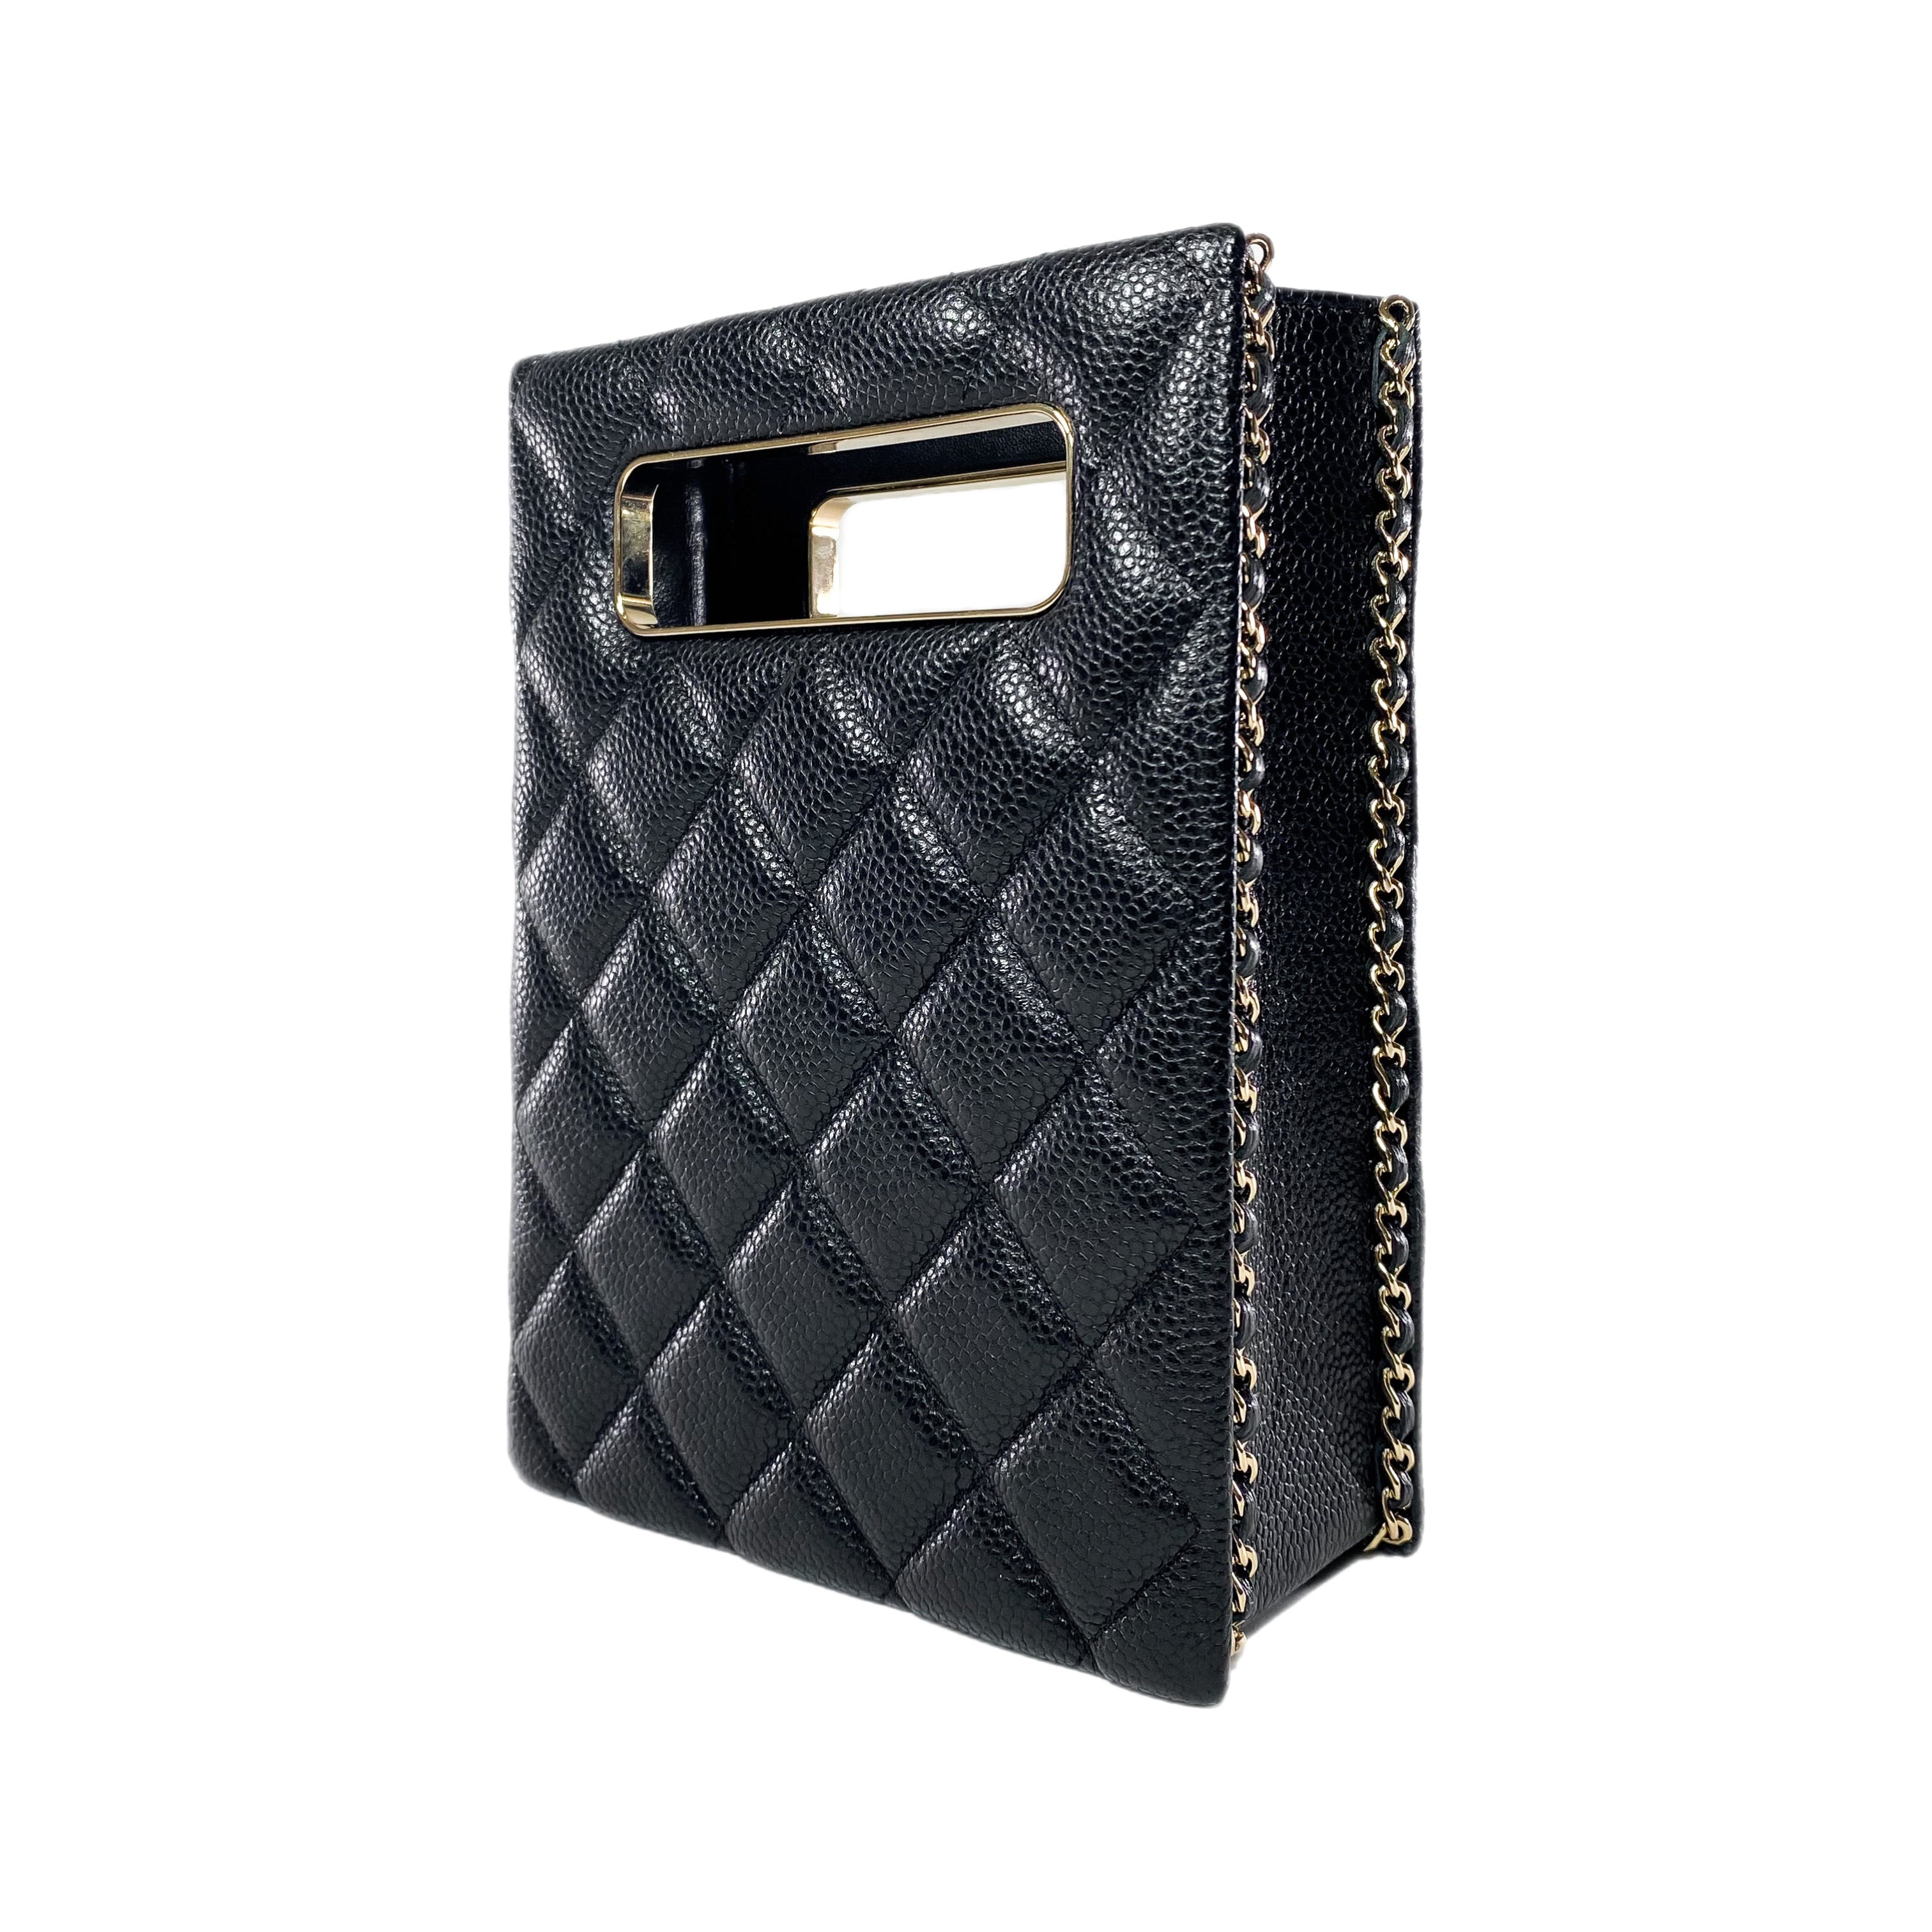 Chanel Black Quilted Caviar Evening Box Bag